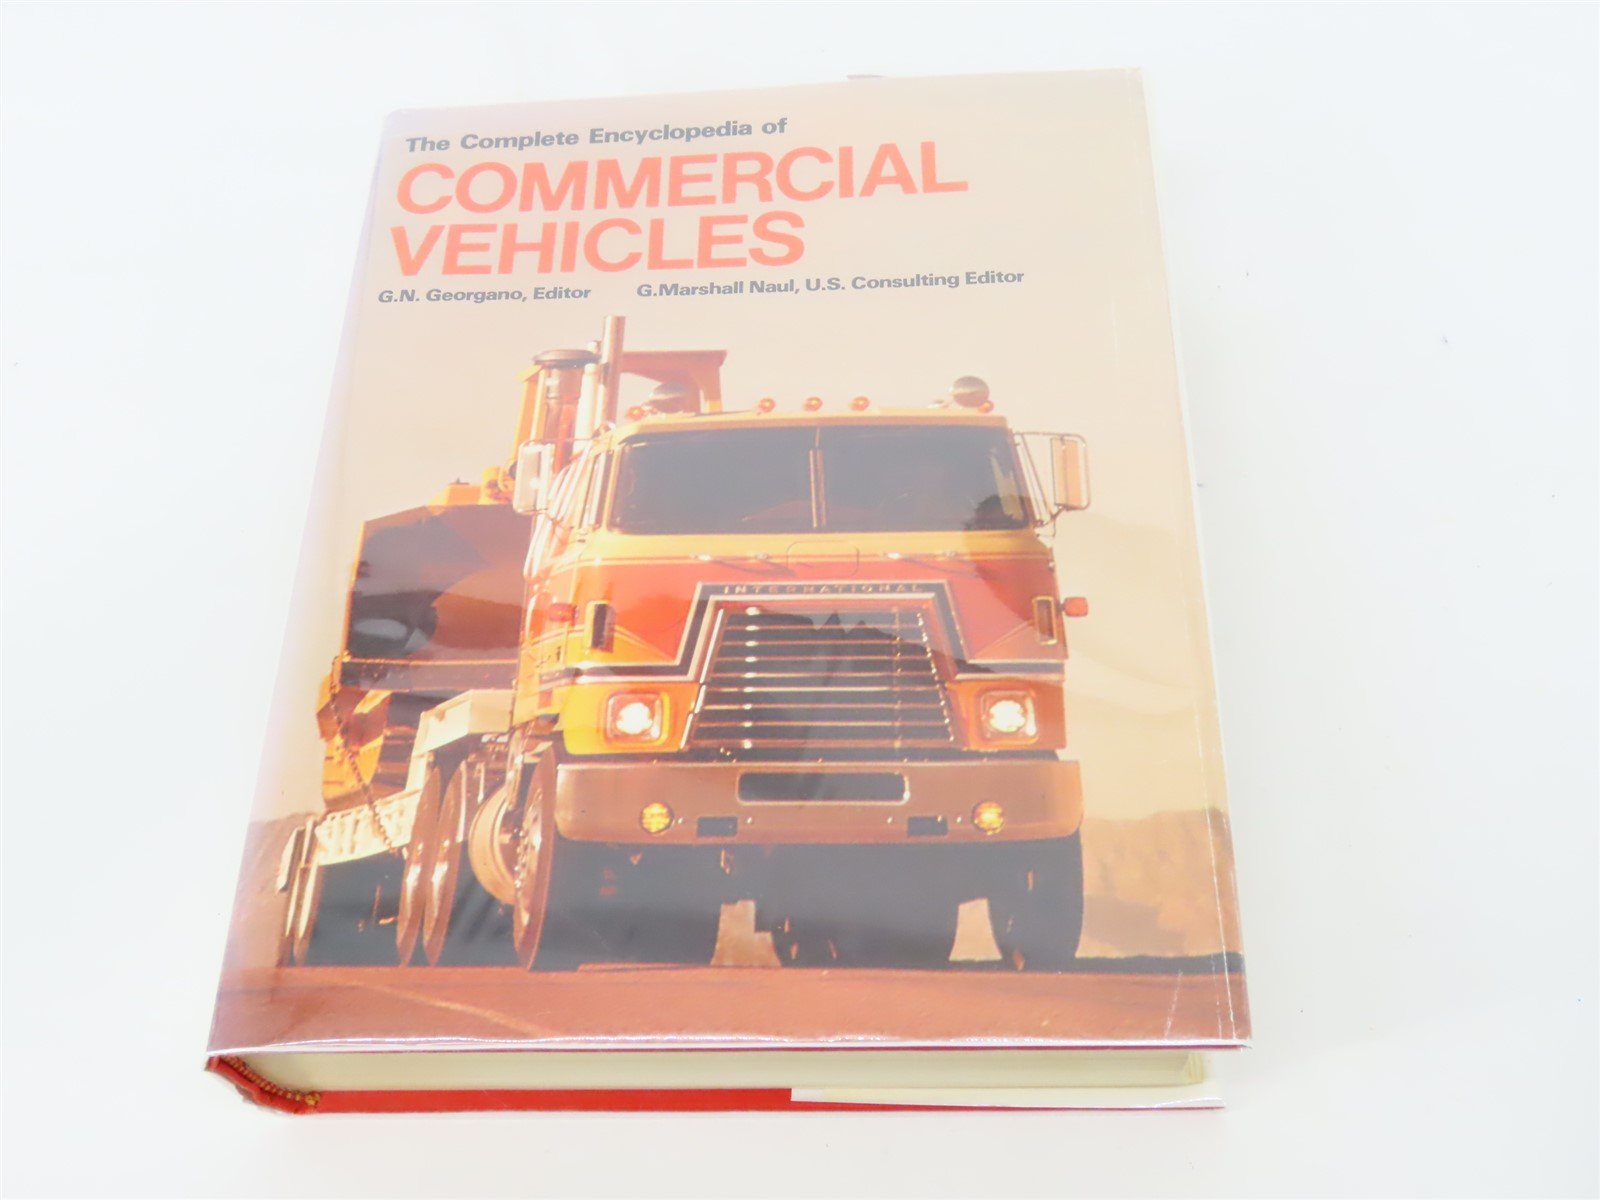 The Complete Encyclopedia of Commercial Vehicles by Georgano & Naul ©1979 HC Bk